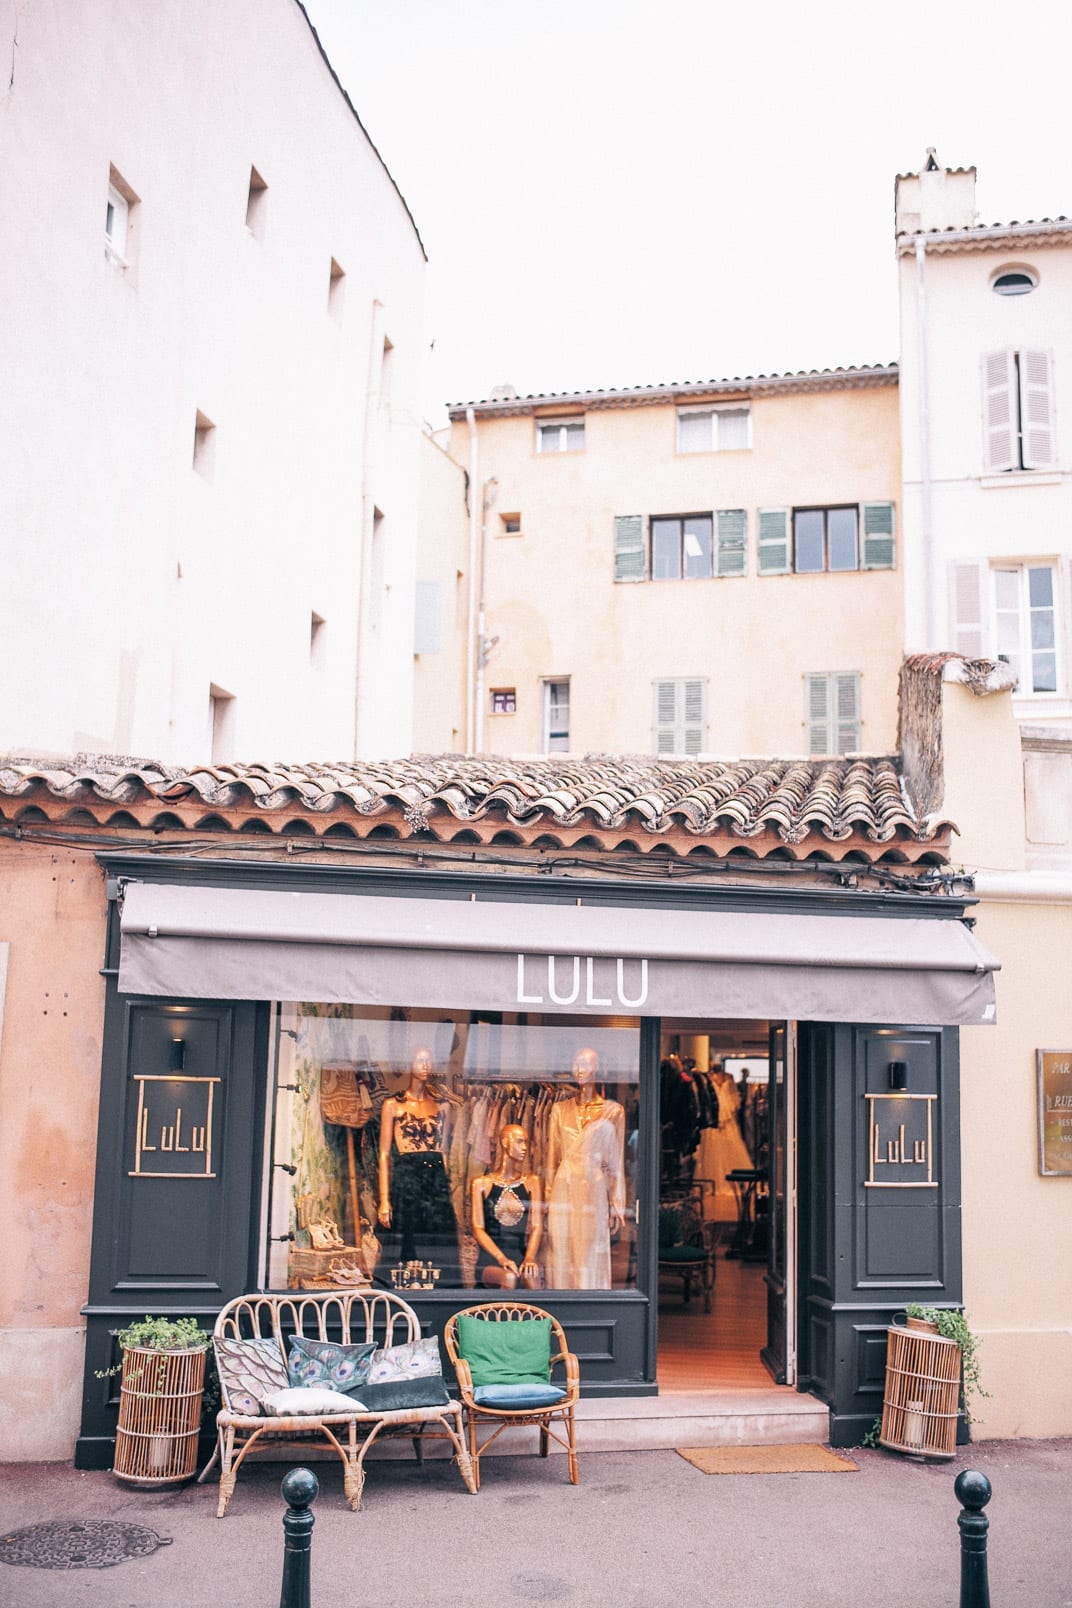 Lucy Cuneo: St Tropez guide - Lulu, made for me!